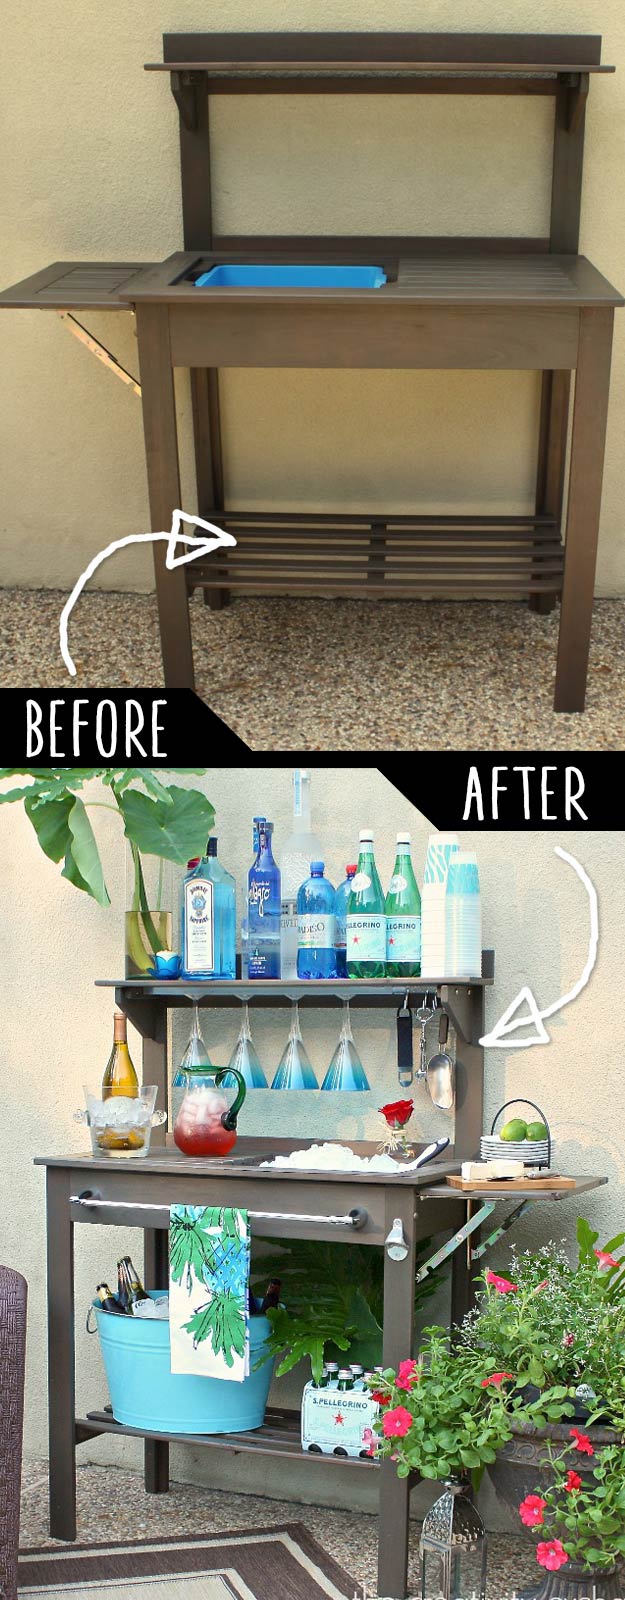 DIY Furniture Hacks | Potting Bench Turned Outdoor Bar | Cool Ideas for Creative Do It Yourself Furniture Made From Things You Might Not Expect - http://diyjoy.com/diy-furniture-hacks